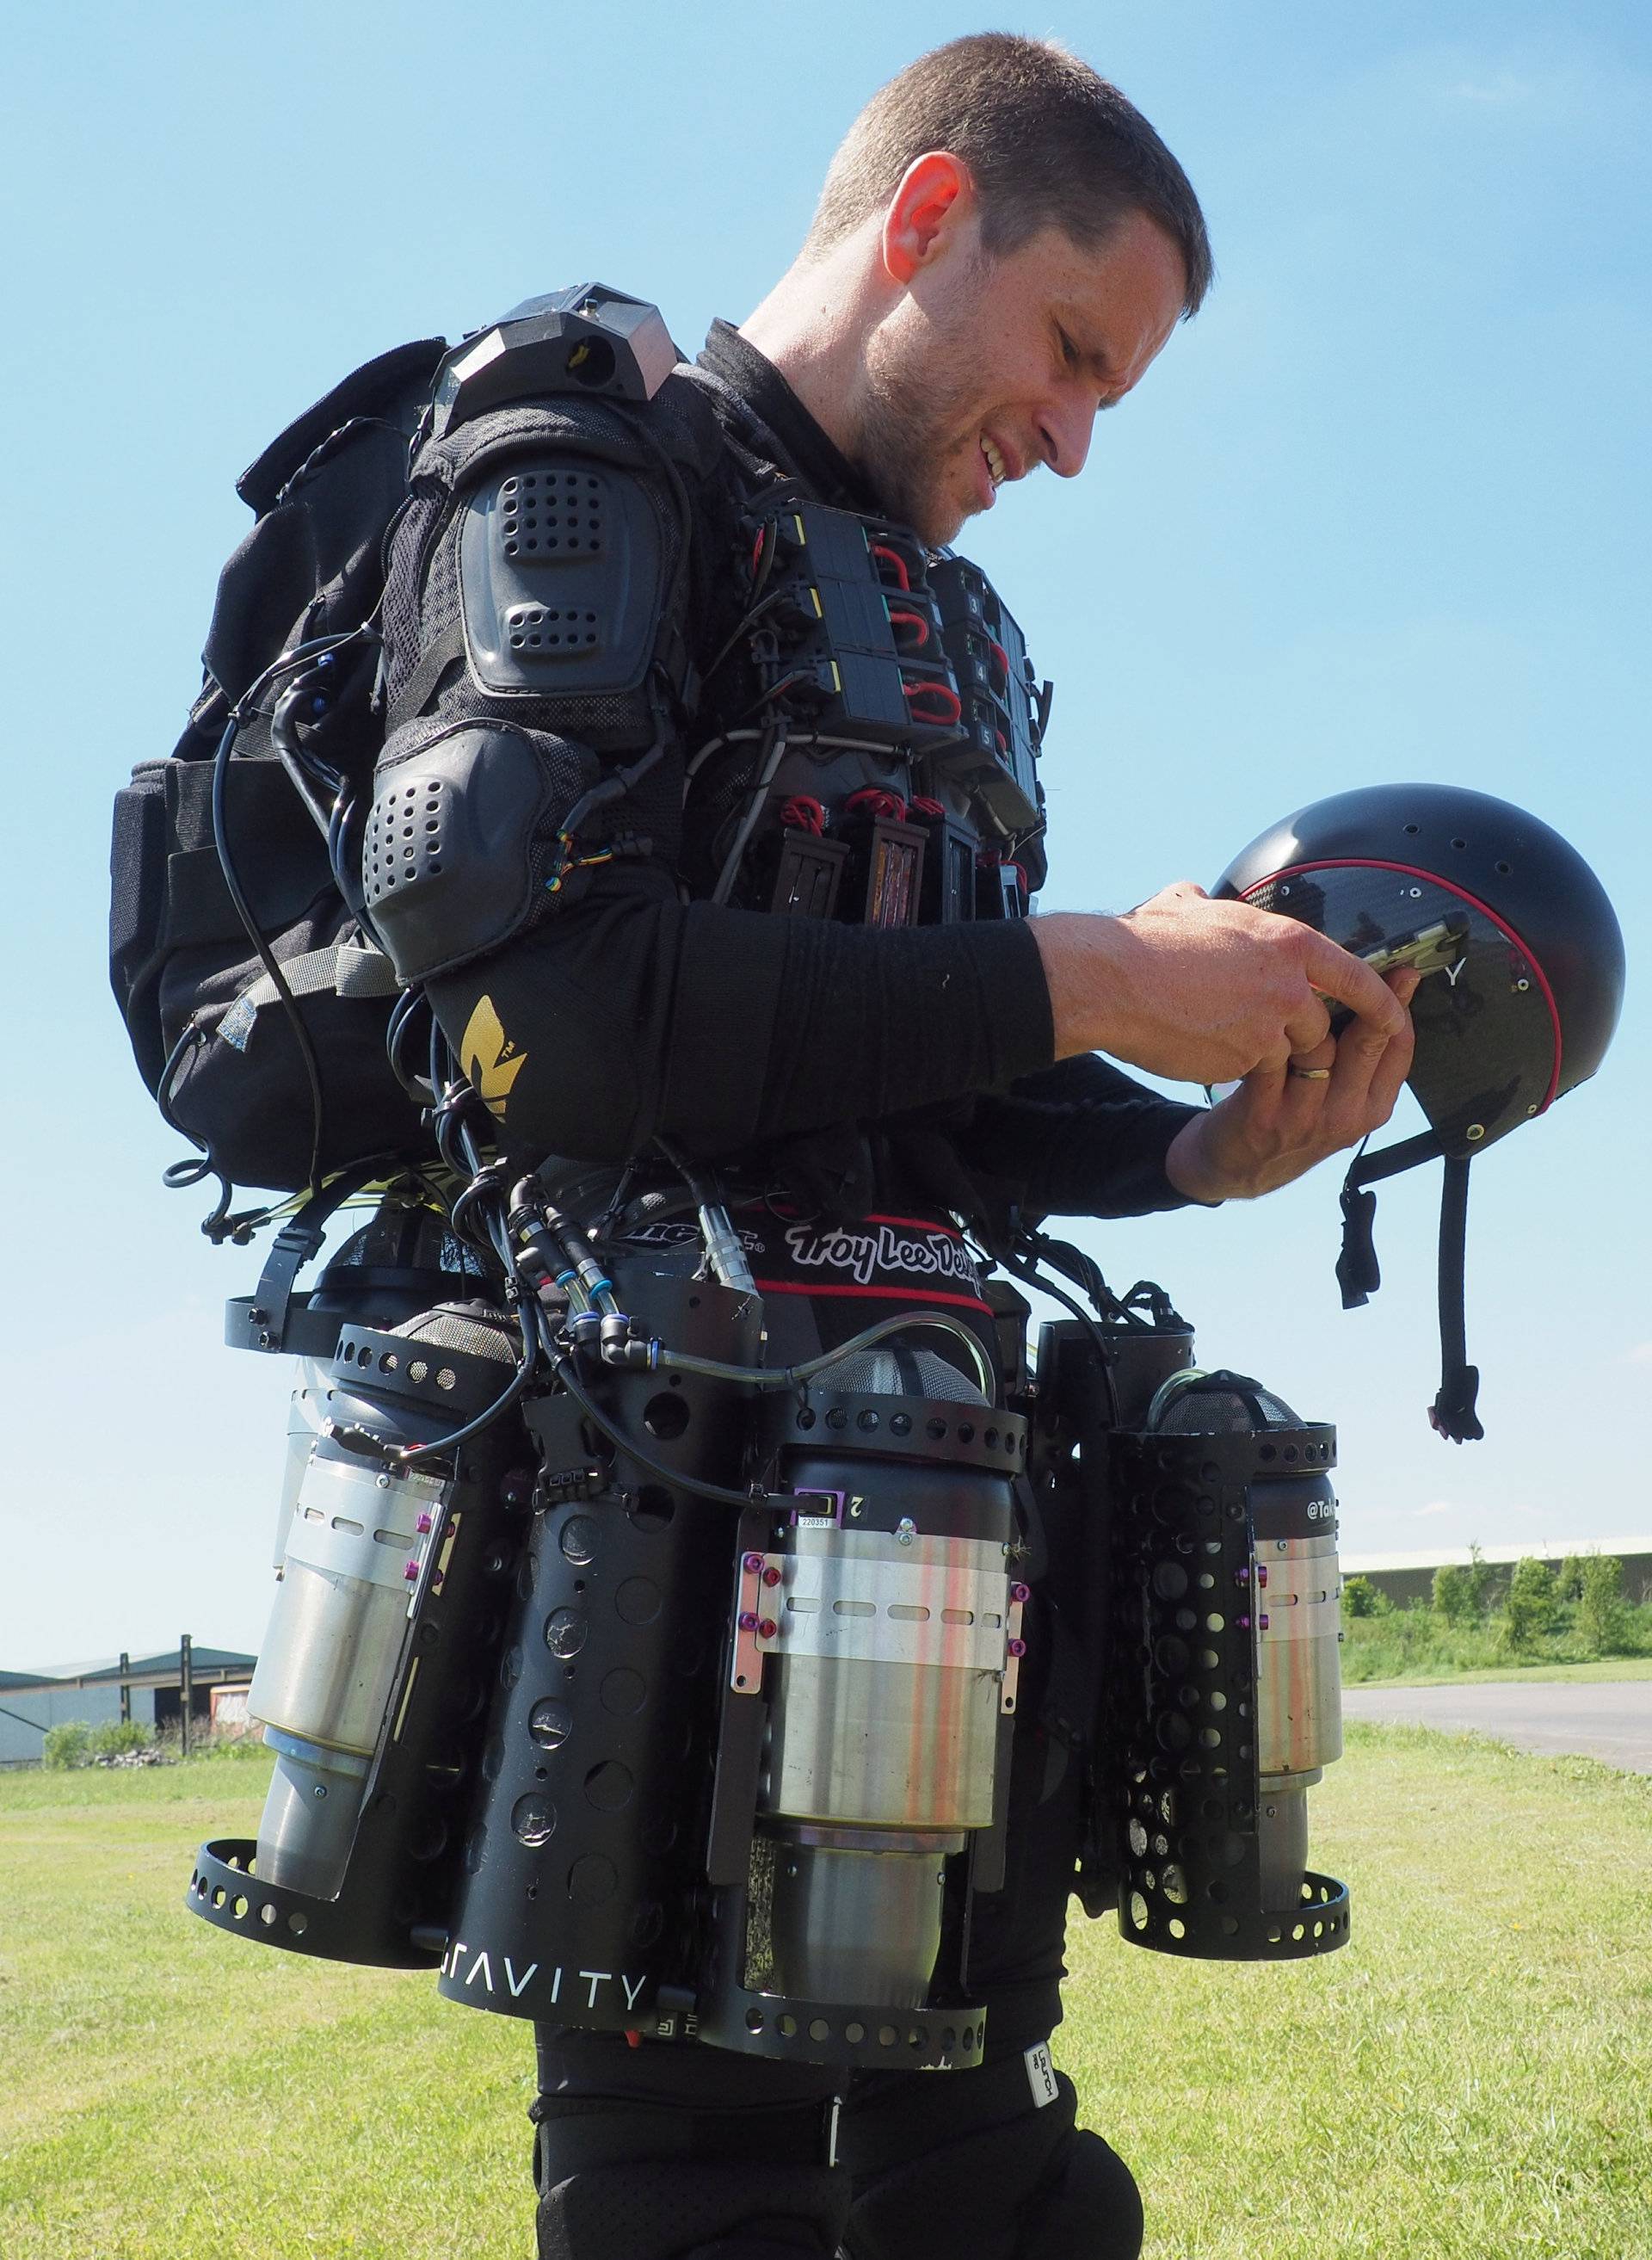 Inventor Richard Browning of technology startup Gravity wears his ÃDaedalusÃ jet suit after flight tests at Henstridge airfield in Somerset